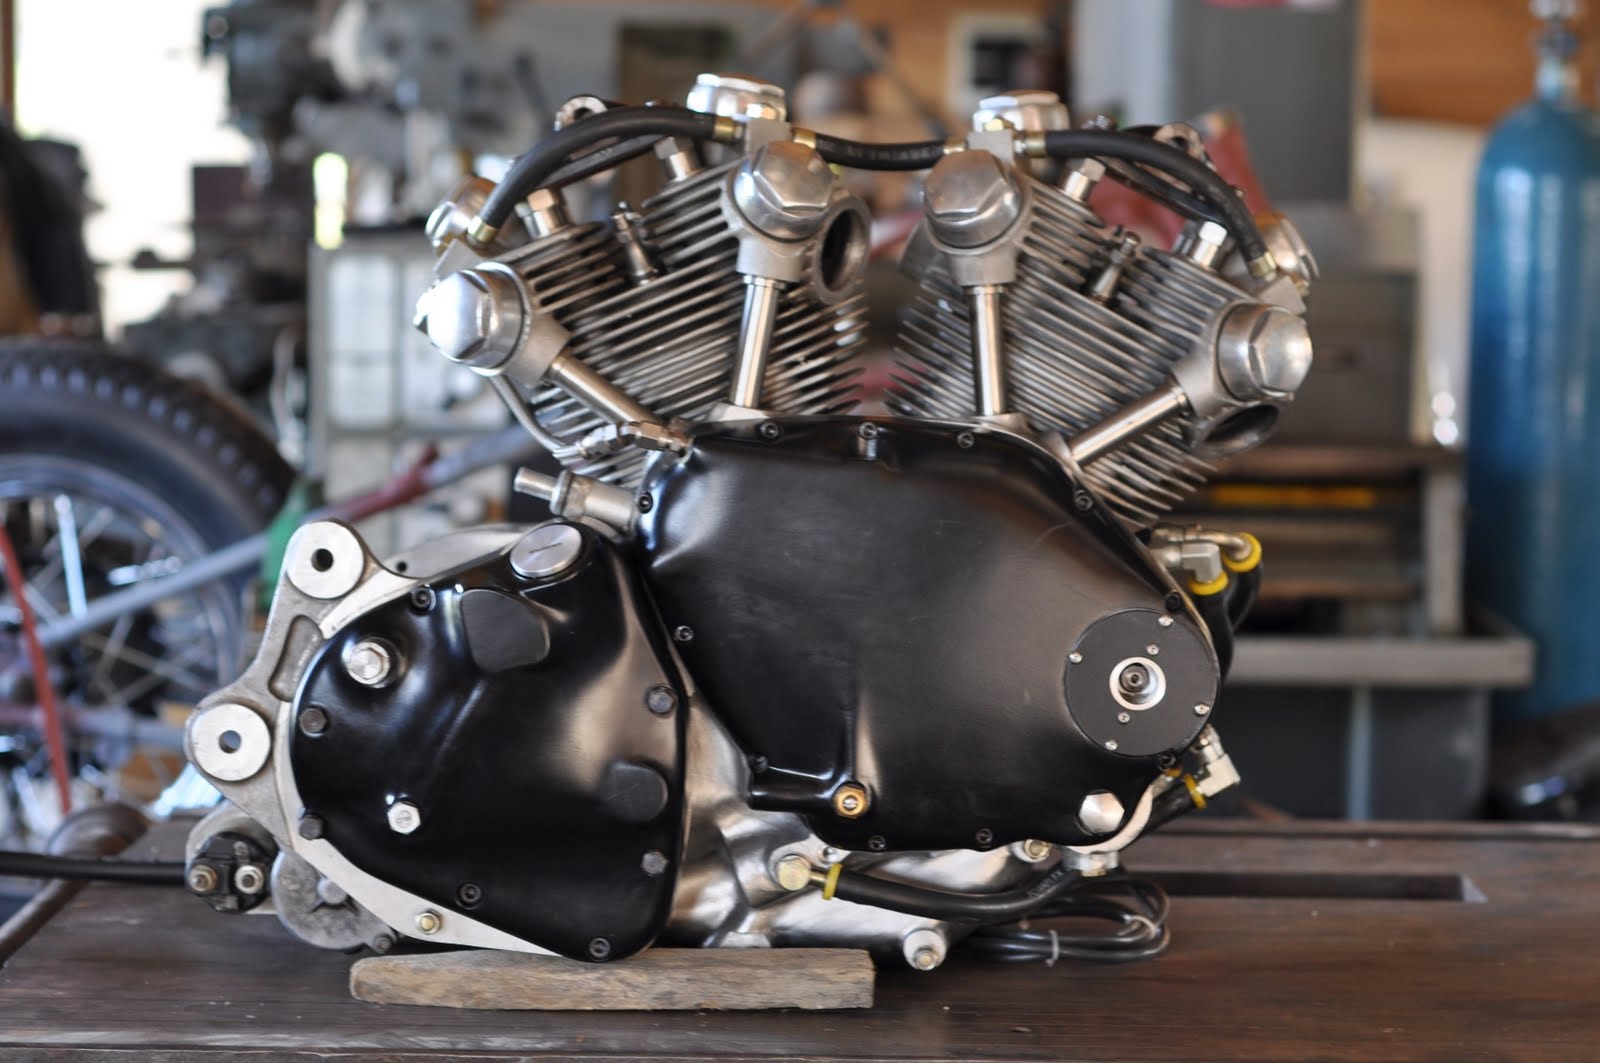 Classic Motorcycle engines - Return of the Cafe Racers